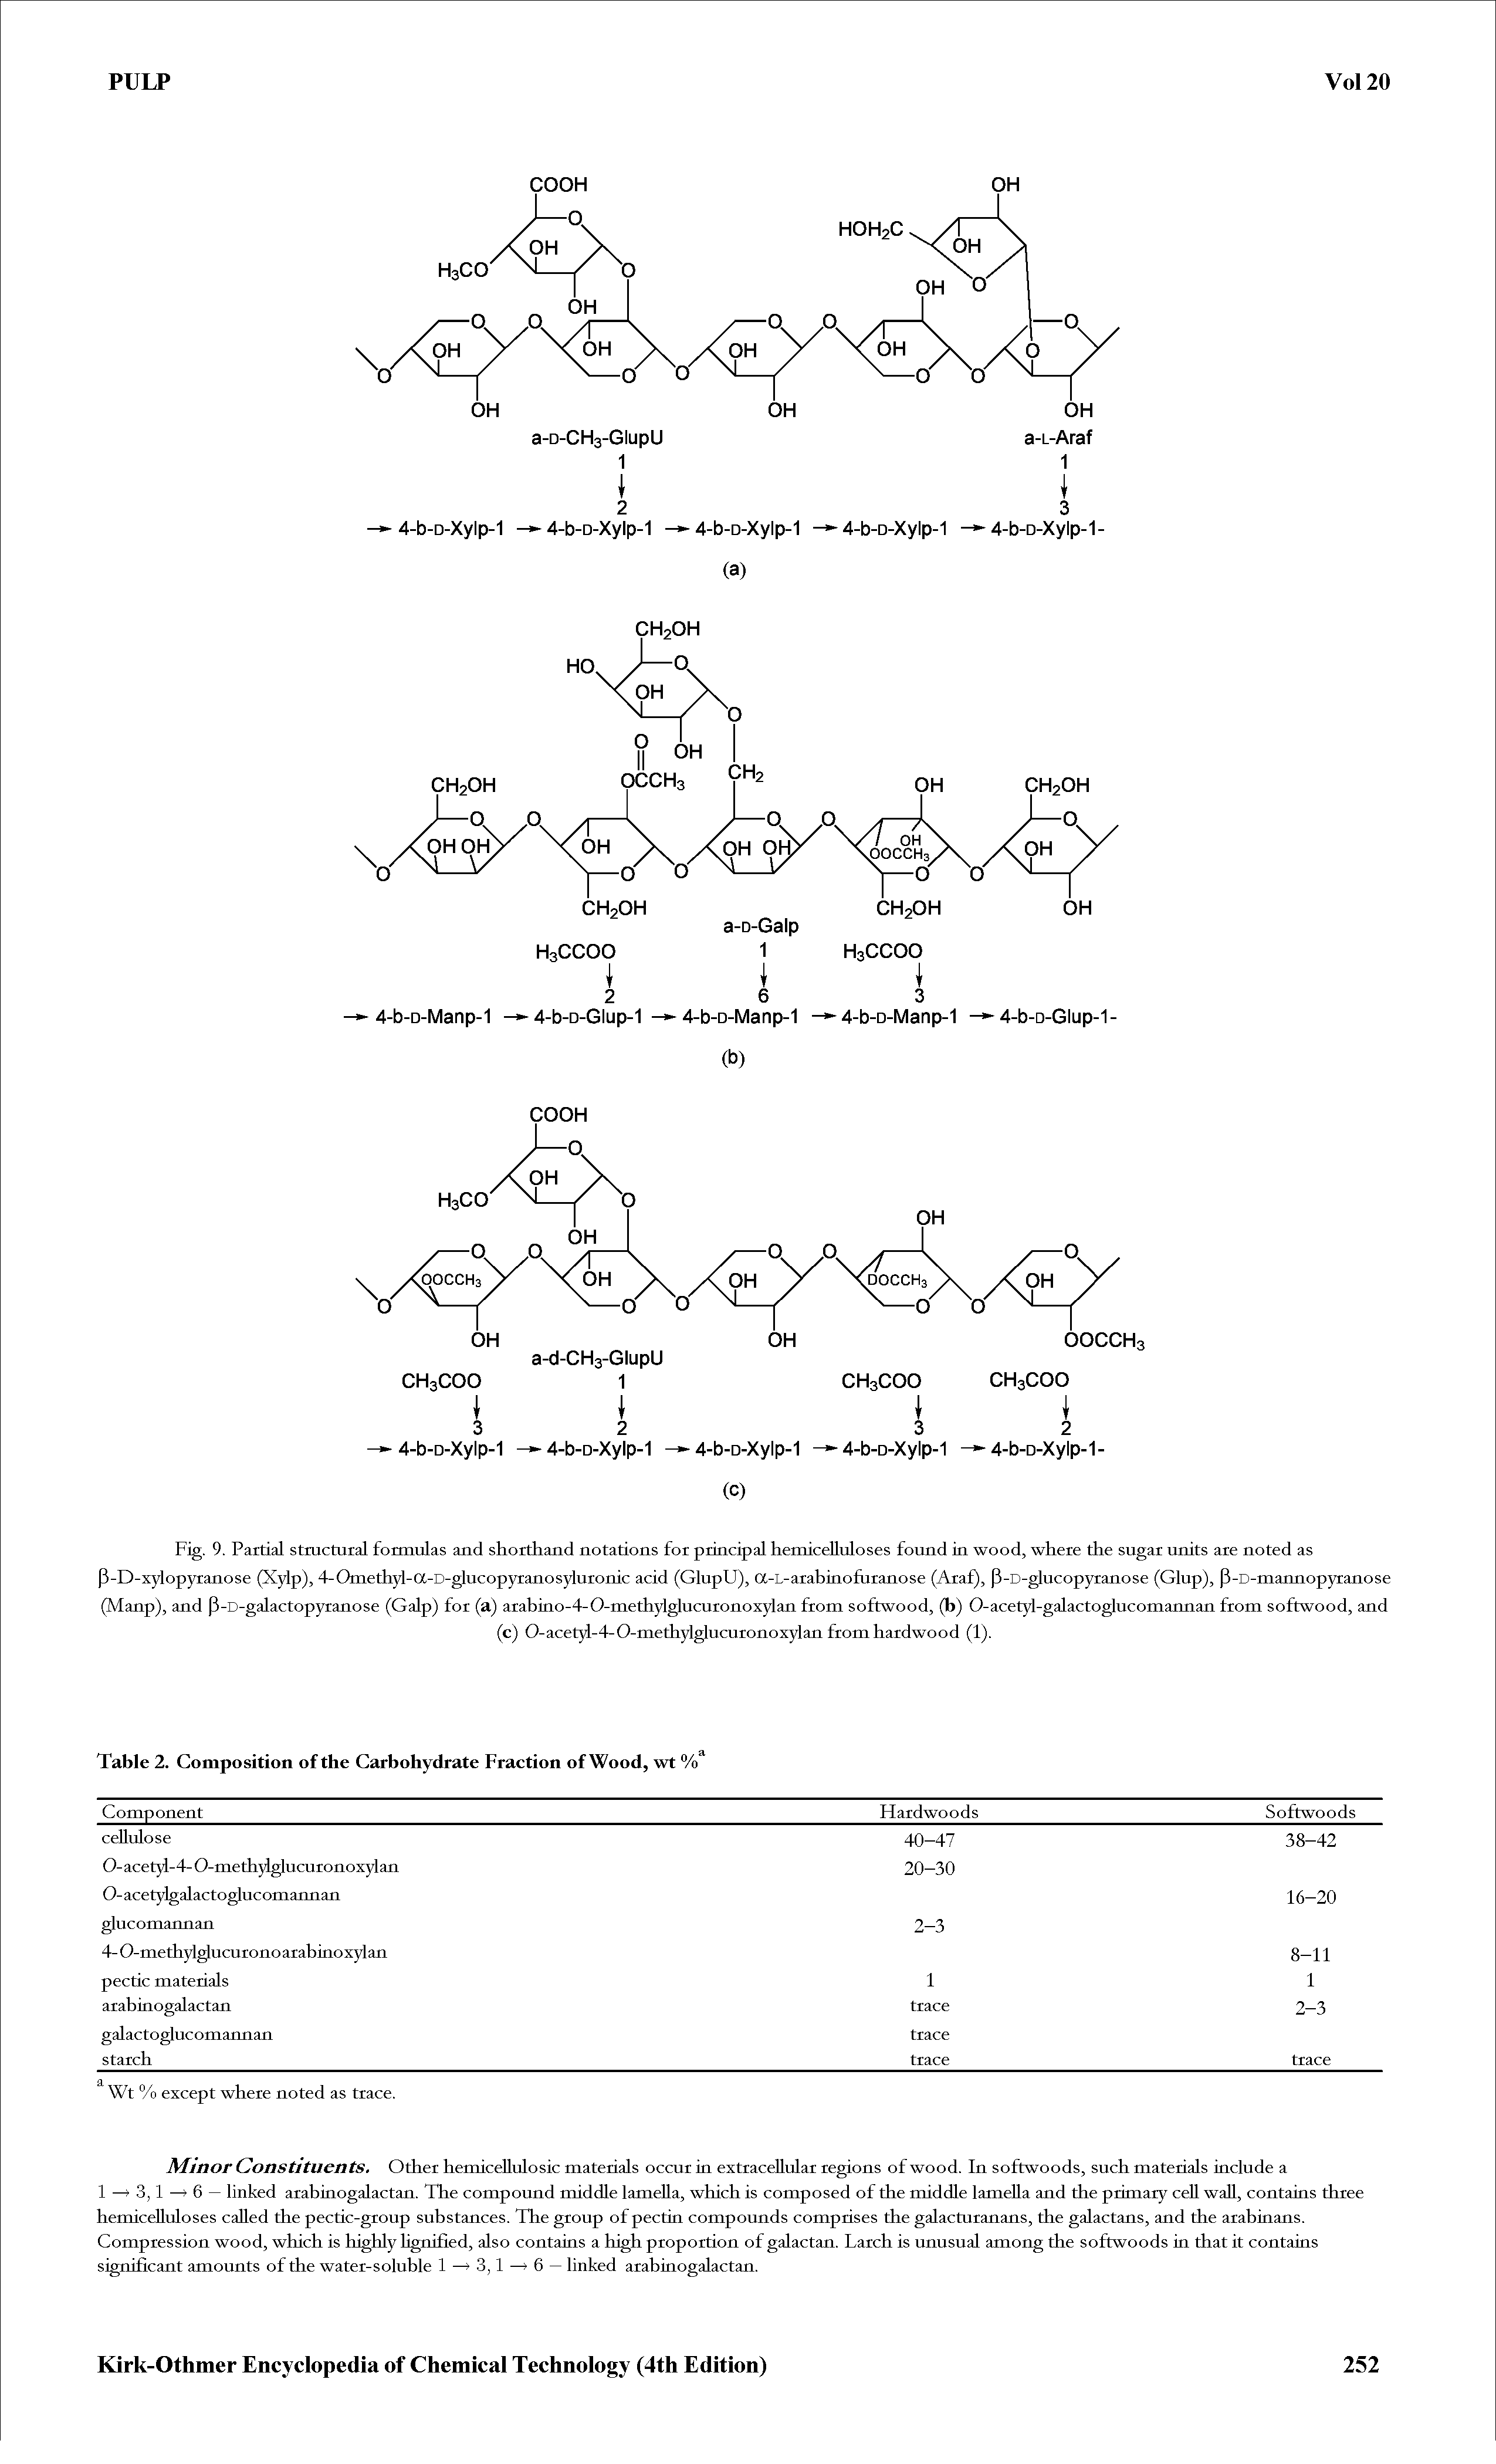 Fig. 9. Partial structural formulas and shorthand notations for principal hemiceUuloses found in wood, where the sugar units ate noted as P-D-xylopyranose (Xylp), 4-Omethyl-a-D-glucopyranosyluronic acid (GlupU), a-L-arabinofuranose (Araf), P-D-glucopyranose (Glup), P-D-mannopyranose (Manp), and P-D-galactopyranose (Galp) for (a) arabino-4-O-methylglucuronoxylan from softwood, (b) 0-acetyl-galactoglucomannan from softwood, and...